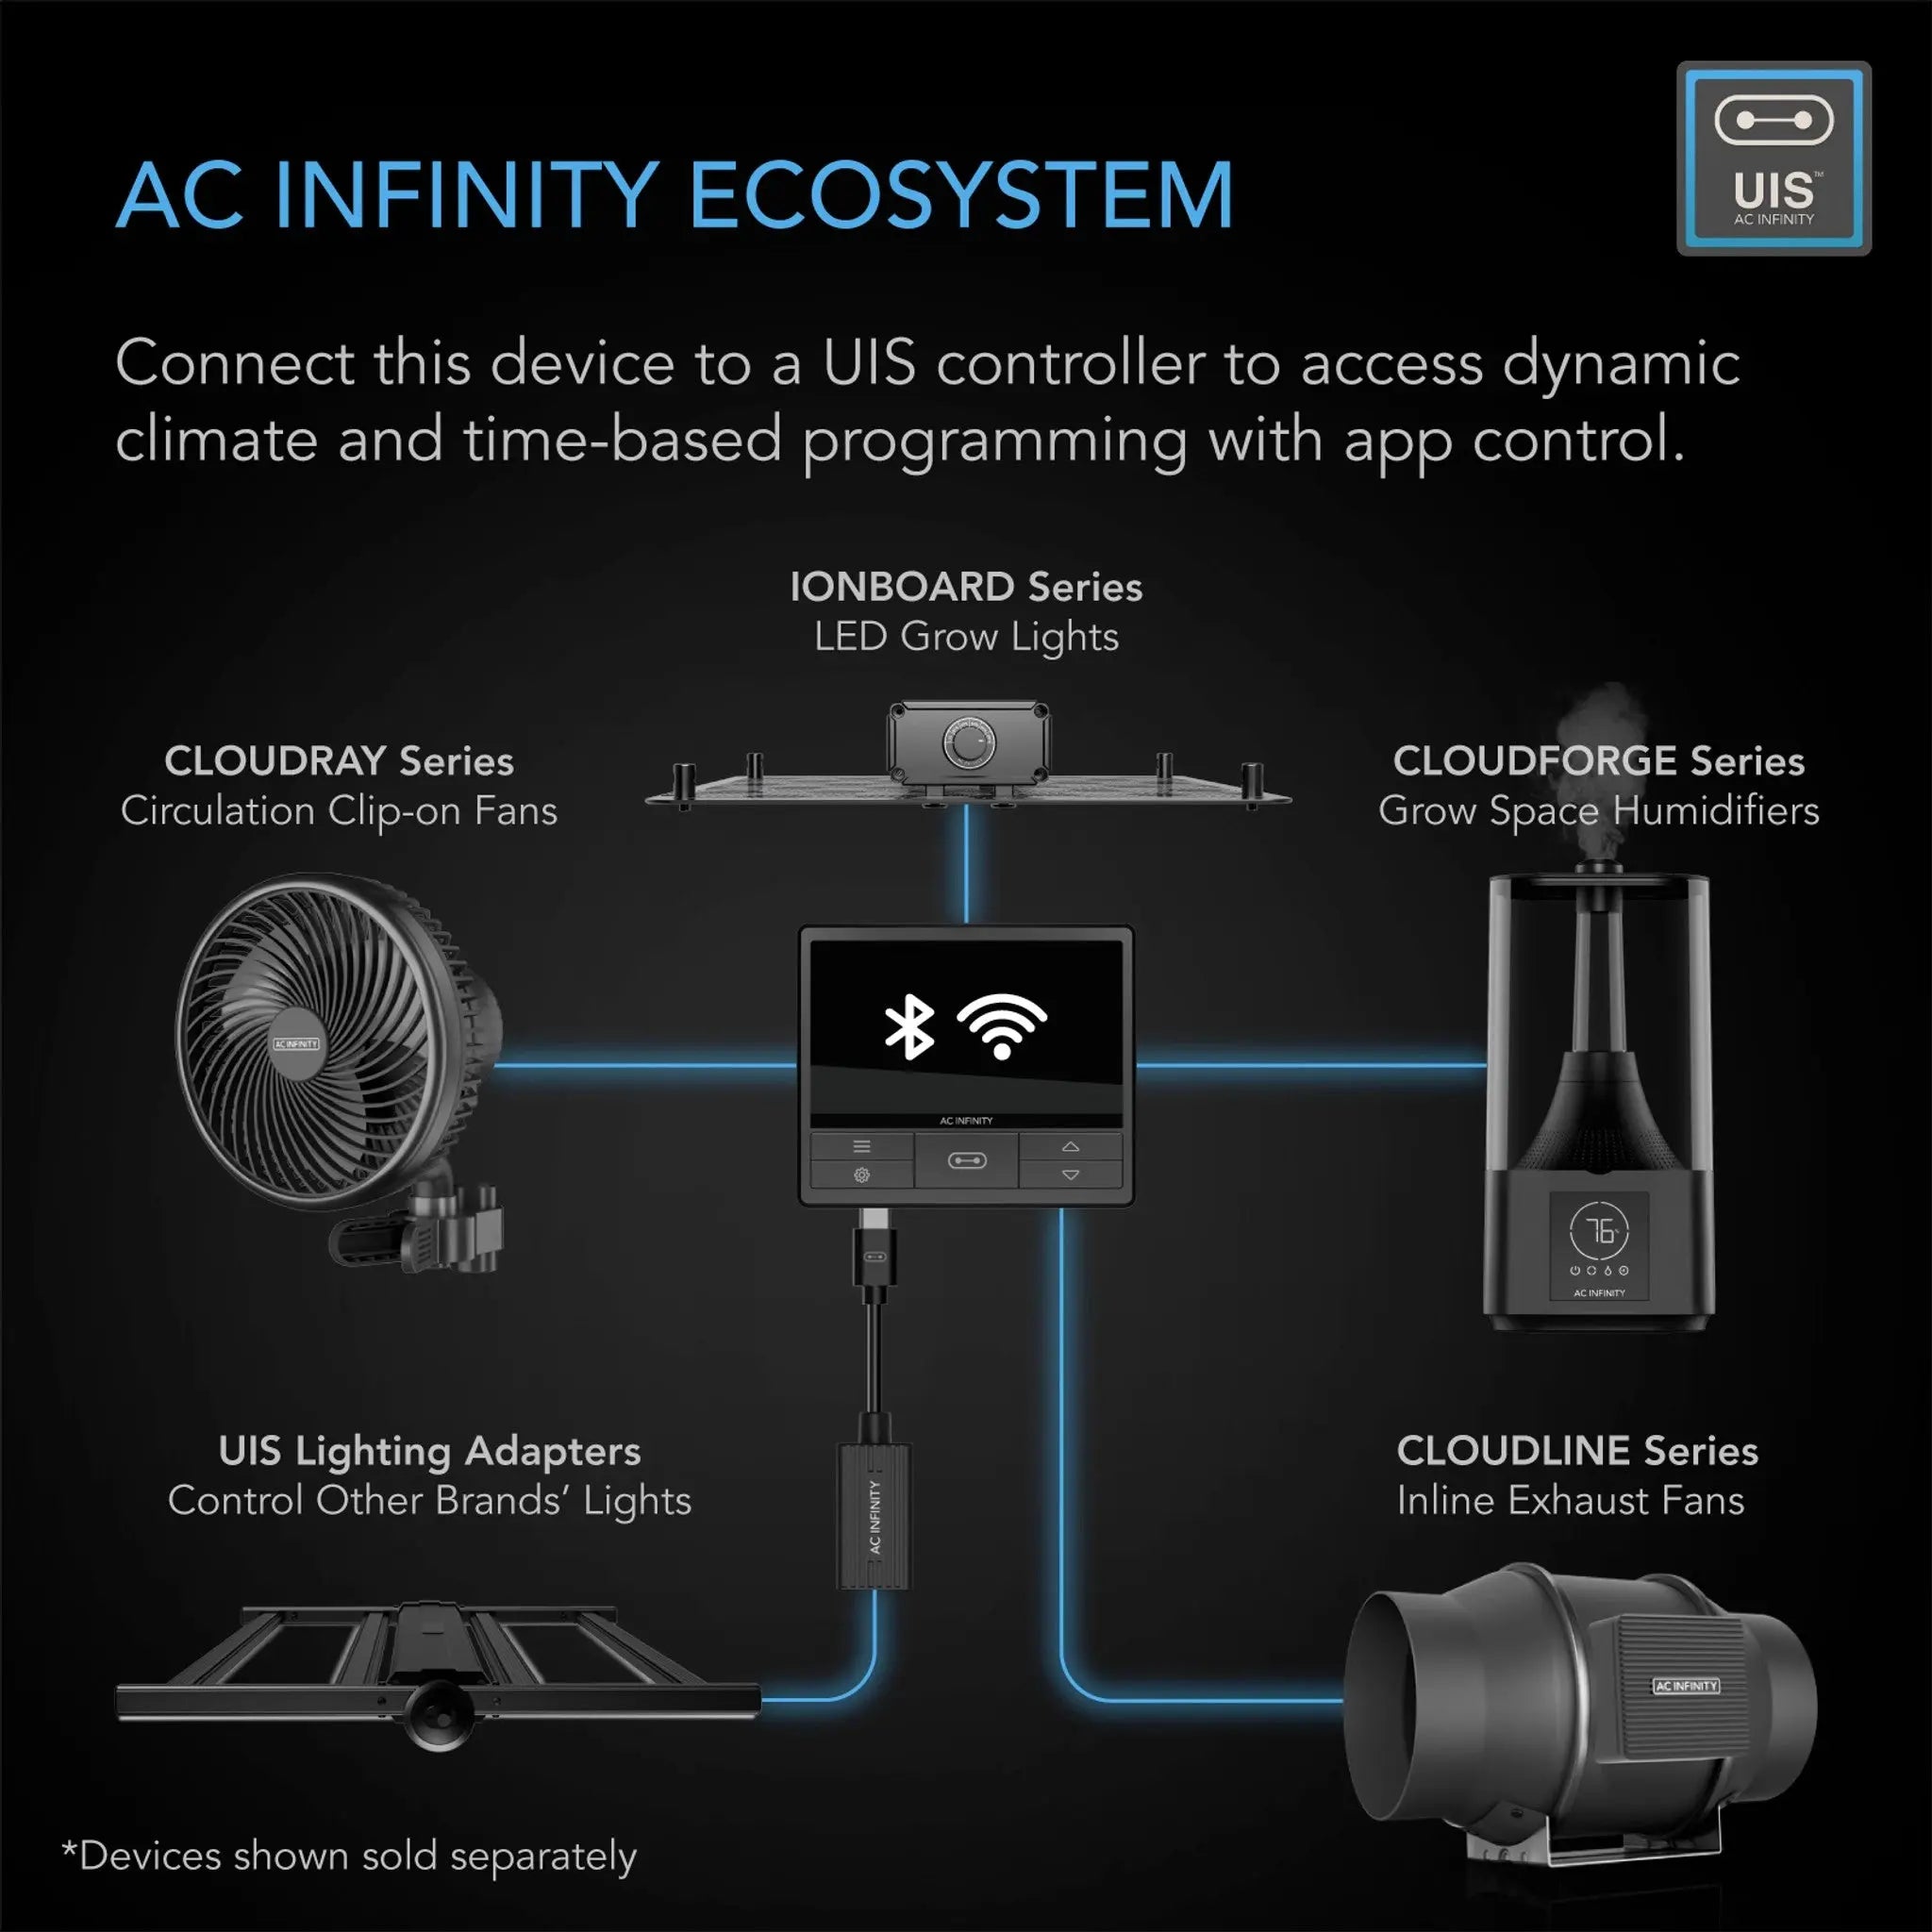 AC Infinity CLOUDFORGE T3, ENVIRONMENTAL PLANT HUMIDIFIER, 4.5L, SMART CONTROLS, TARGETED VAPORIZING AC Infinity